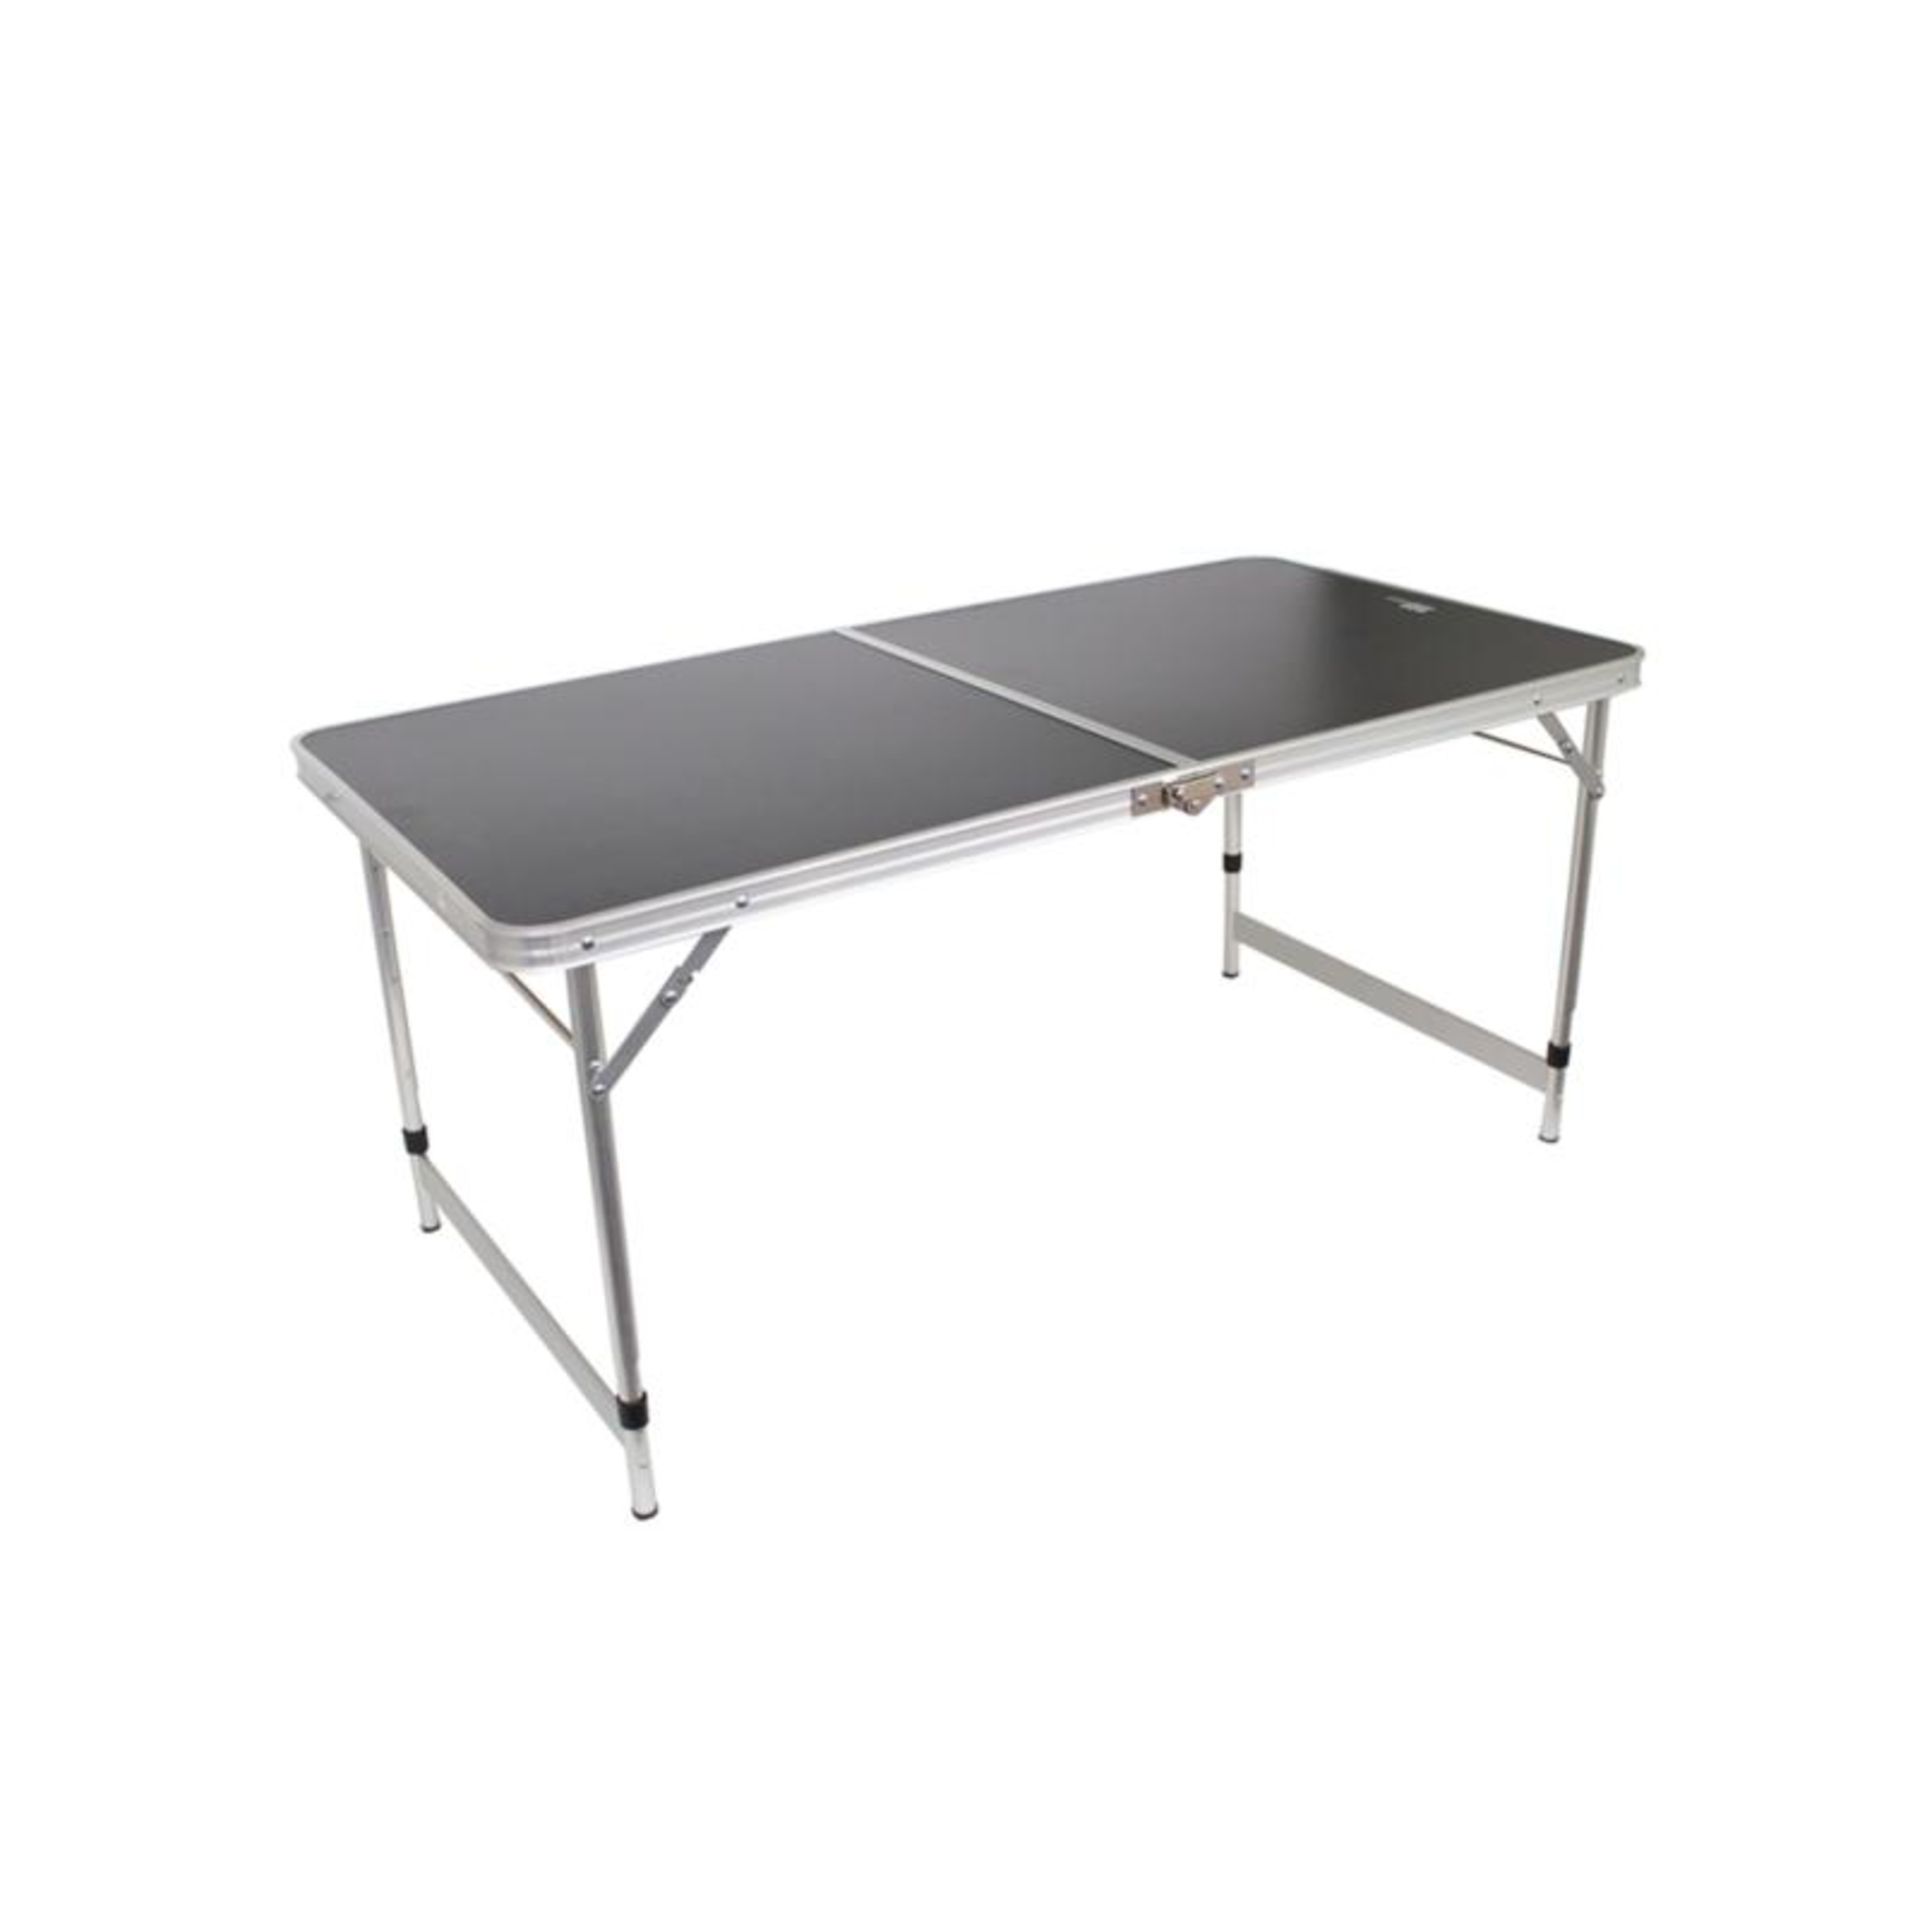 V Brand New 1.2m Double Folding Table With Carry Bag - Charcoal Top/Silver Frame - Lightweight for